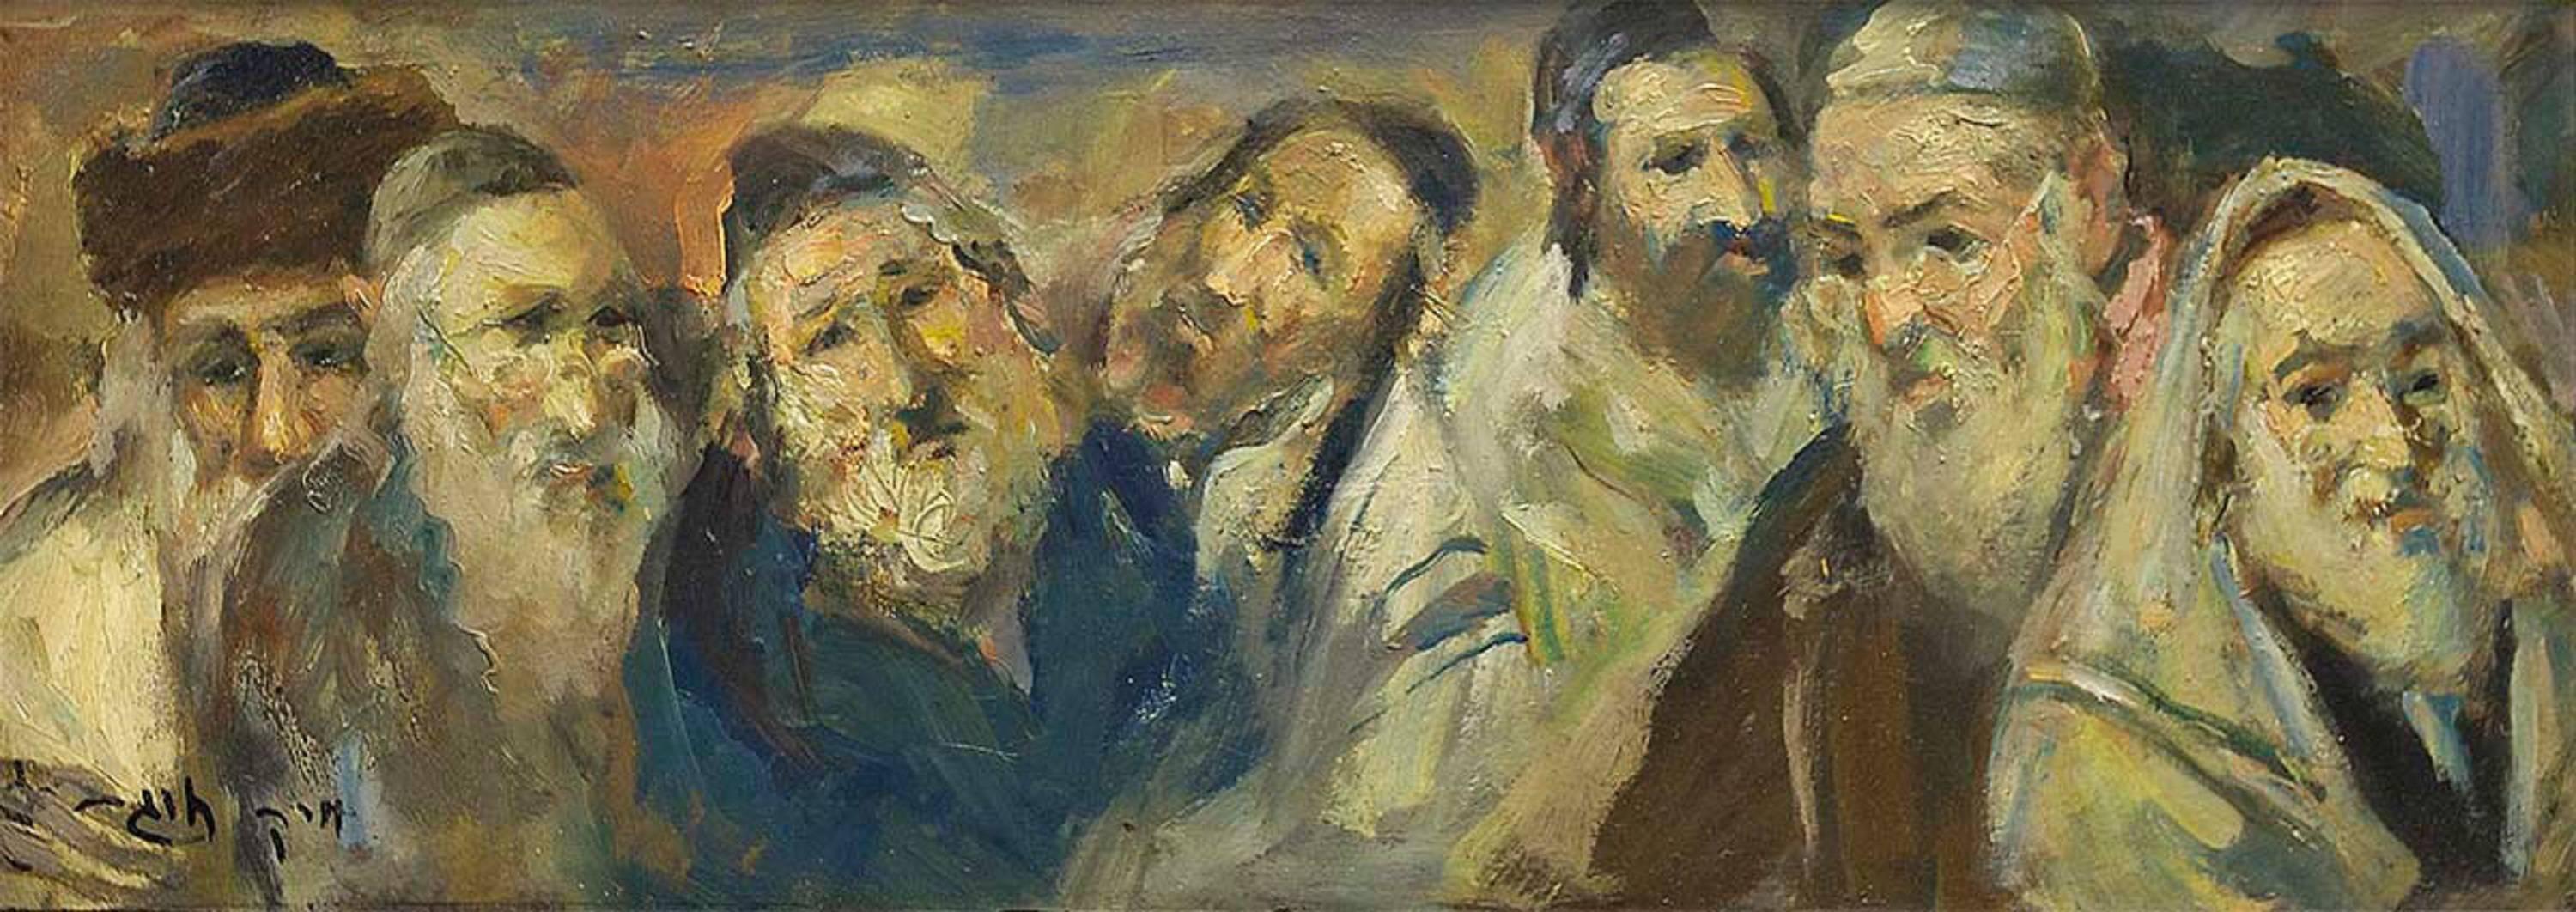 Unknown Figurative Painting - Scholars and Rabbis, Judaica Oil Painting